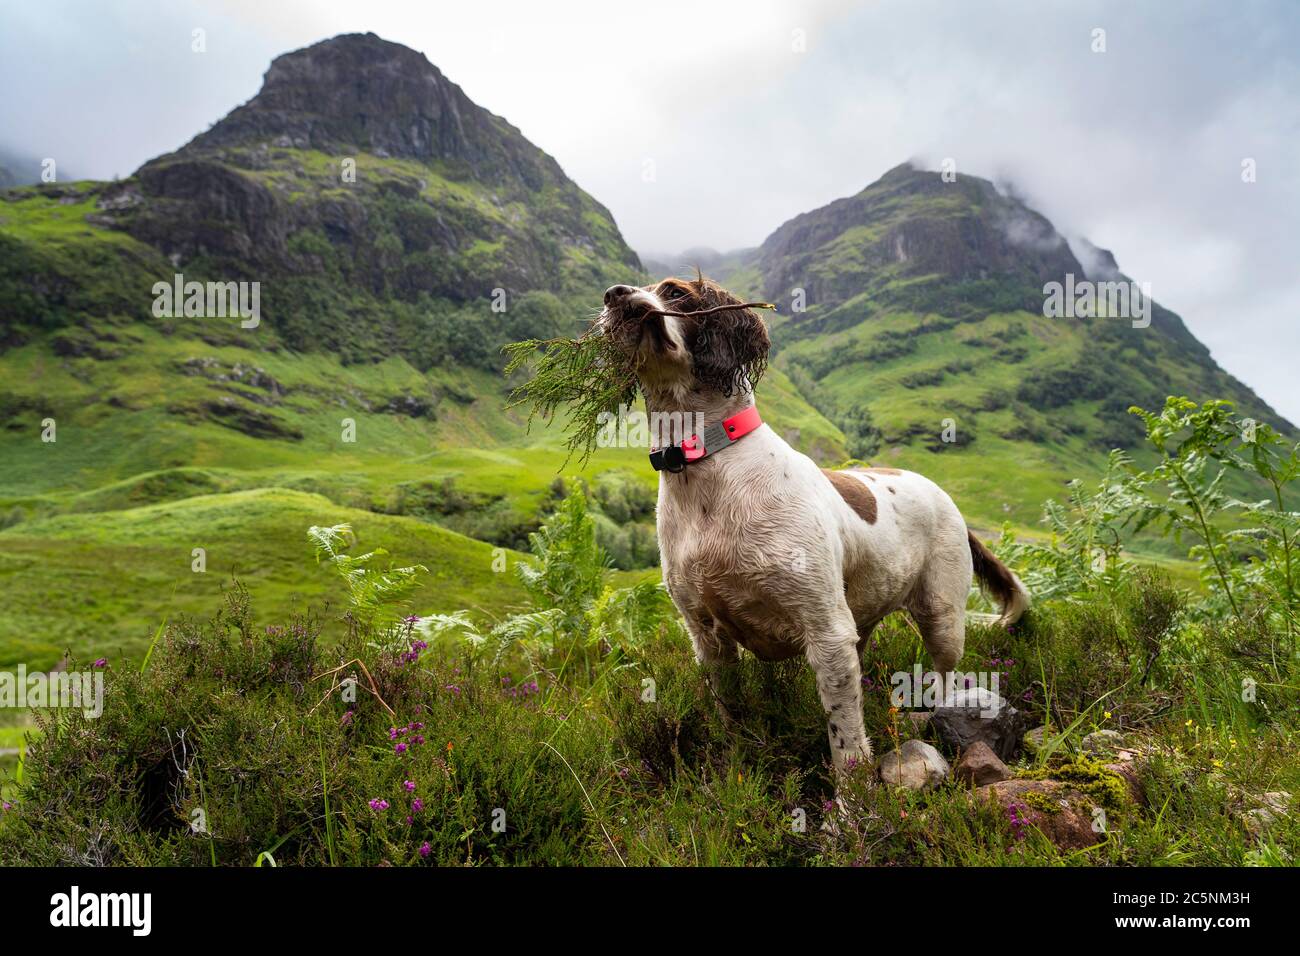 Glen Coe, Scotland, UK. 4 July, 2020. Teal the dog travels to Glen Coe on first weekend after 5 mile travel restriction was lifted by the Scottish Government. Springer spaniel dog with mouth full of heather with Glen Coe mountains to rear. Iain Masterton/Alamy Live News Stock Photo